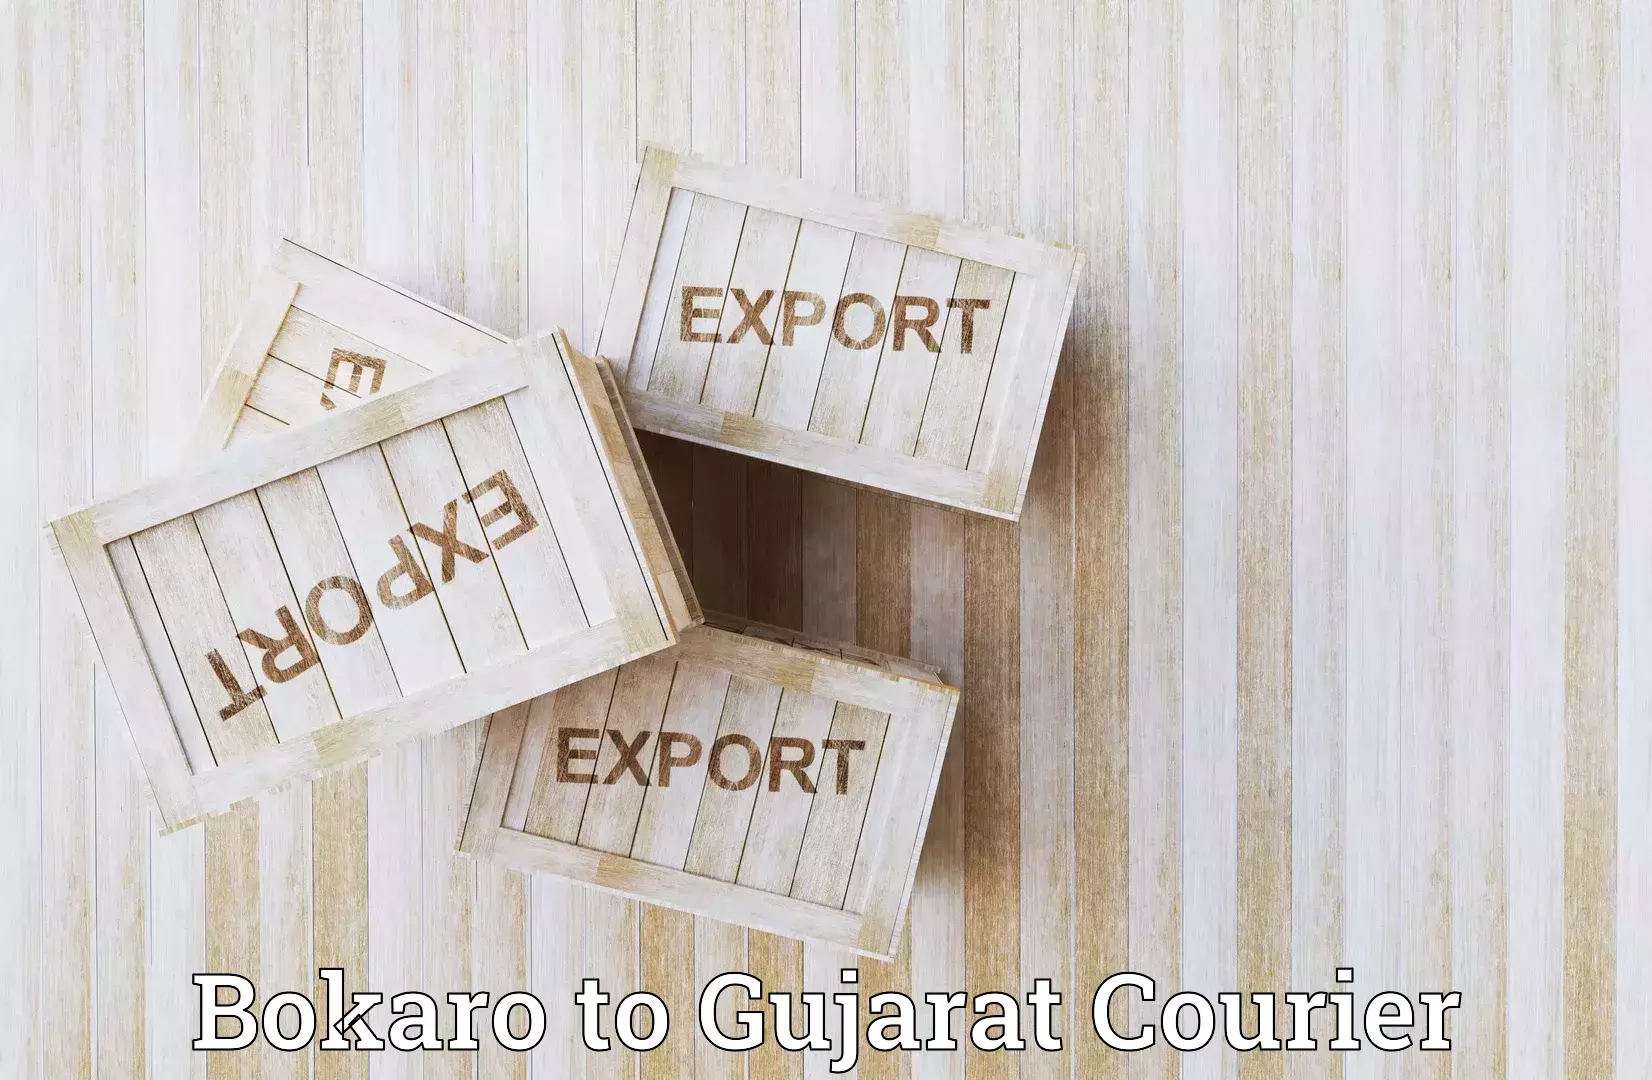 Courier service comparison Bokaro to Palanpur